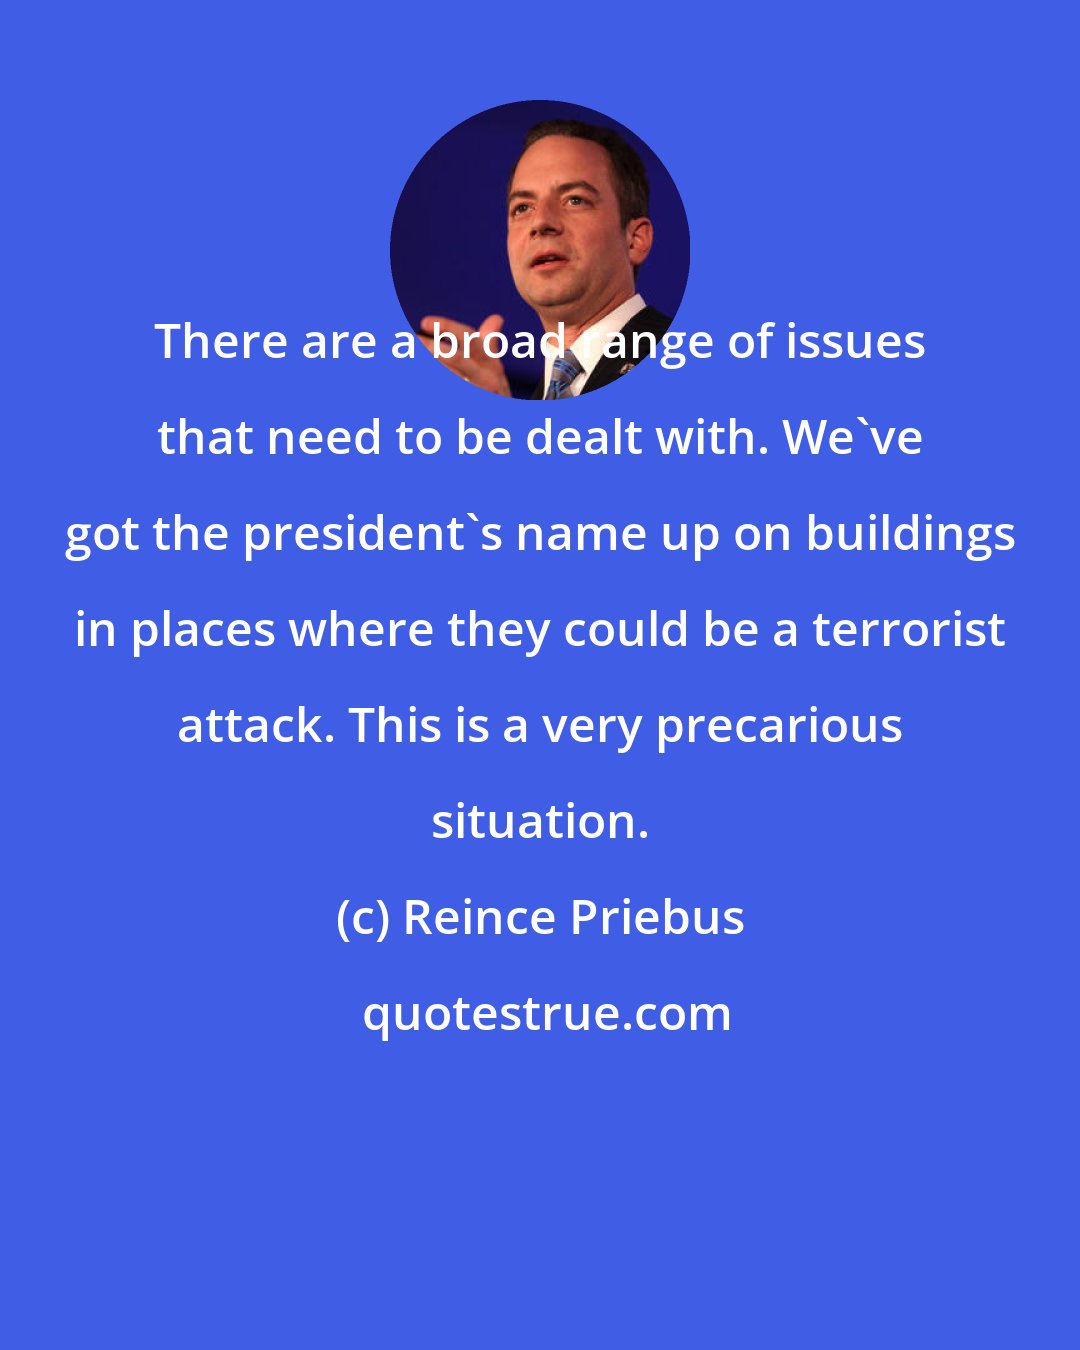 Reince Priebus: There are a broad range of issues that need to be dealt with. We've got the president's name up on buildings in places where they could be a terrorist attack. This is a very precarious situation.